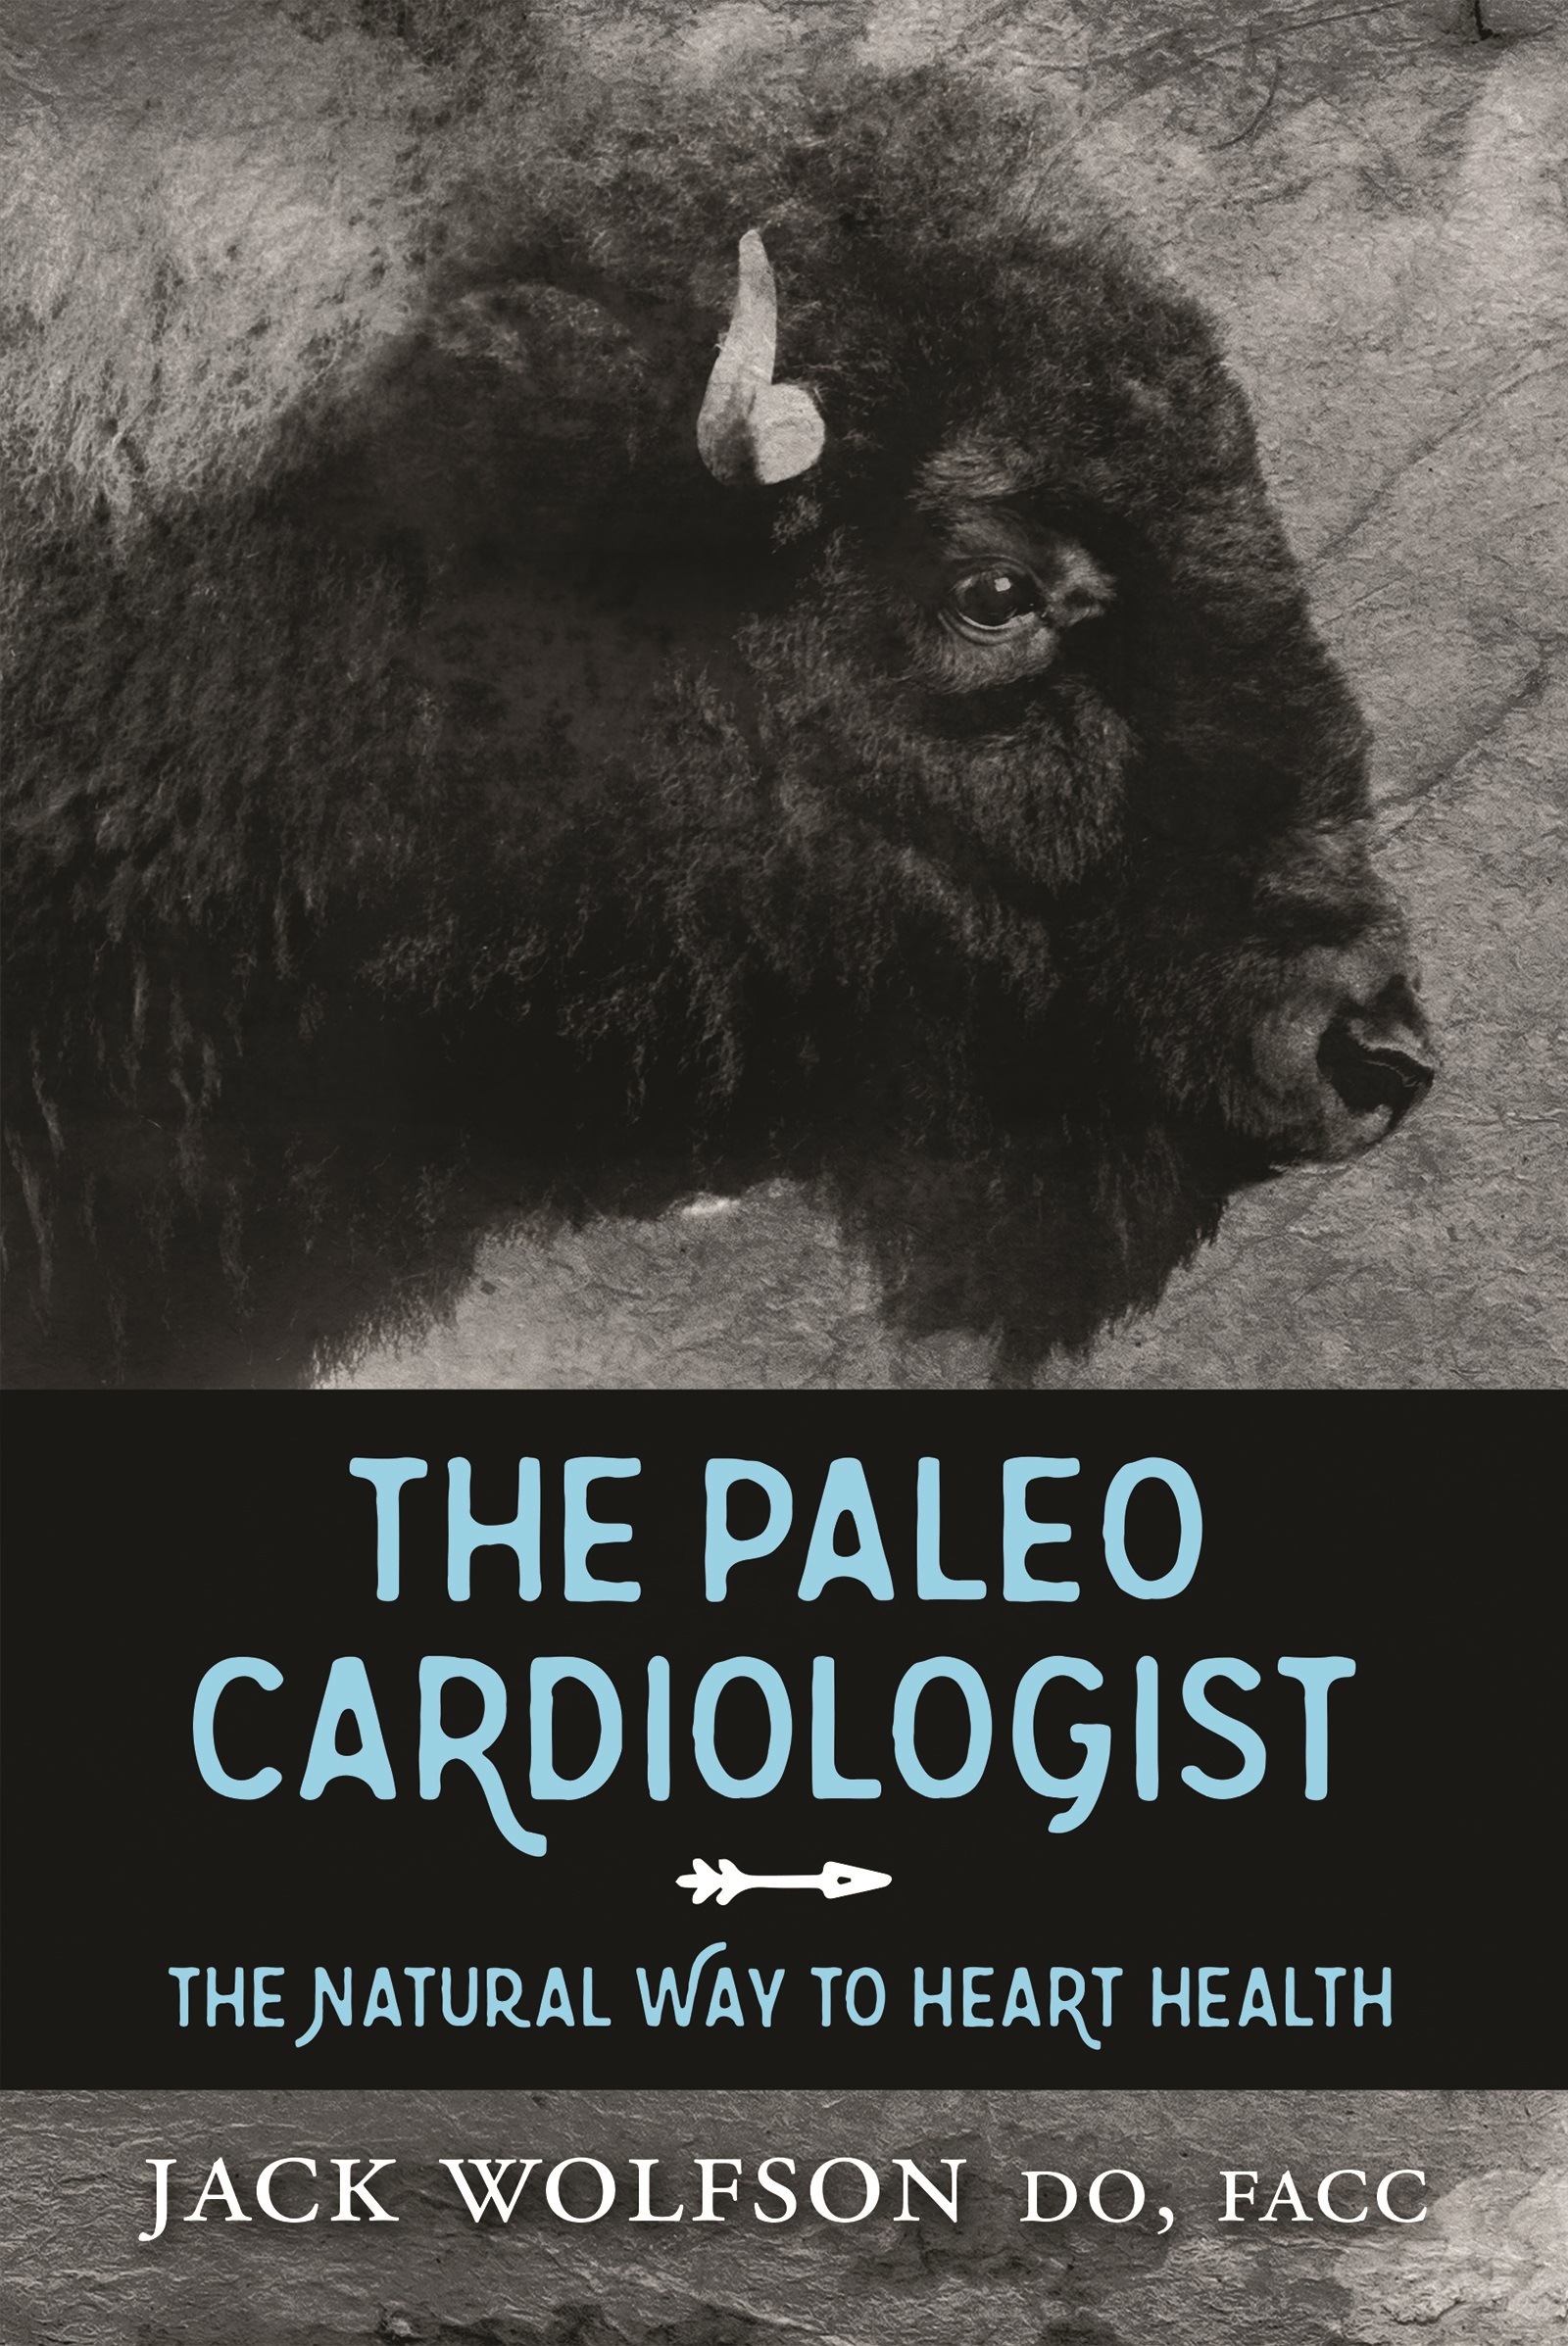 The Paleo Cardiologist by Jack Wolfson book cover